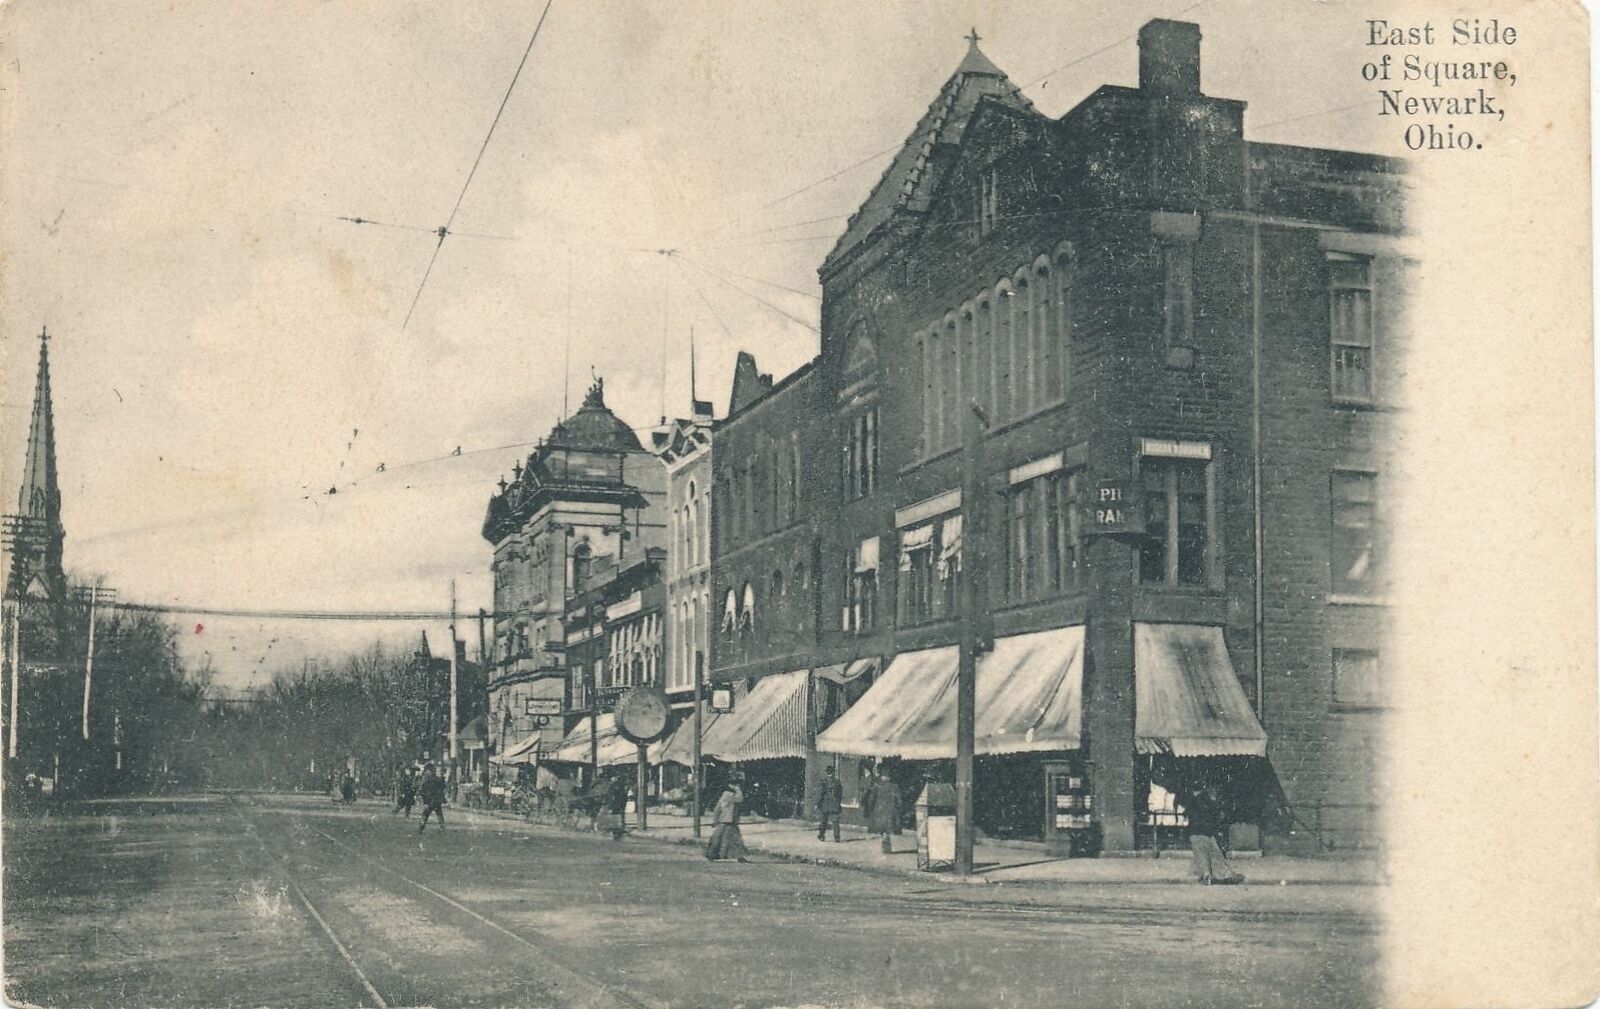 NEWARK OH - East Side of Square - udb - 1907